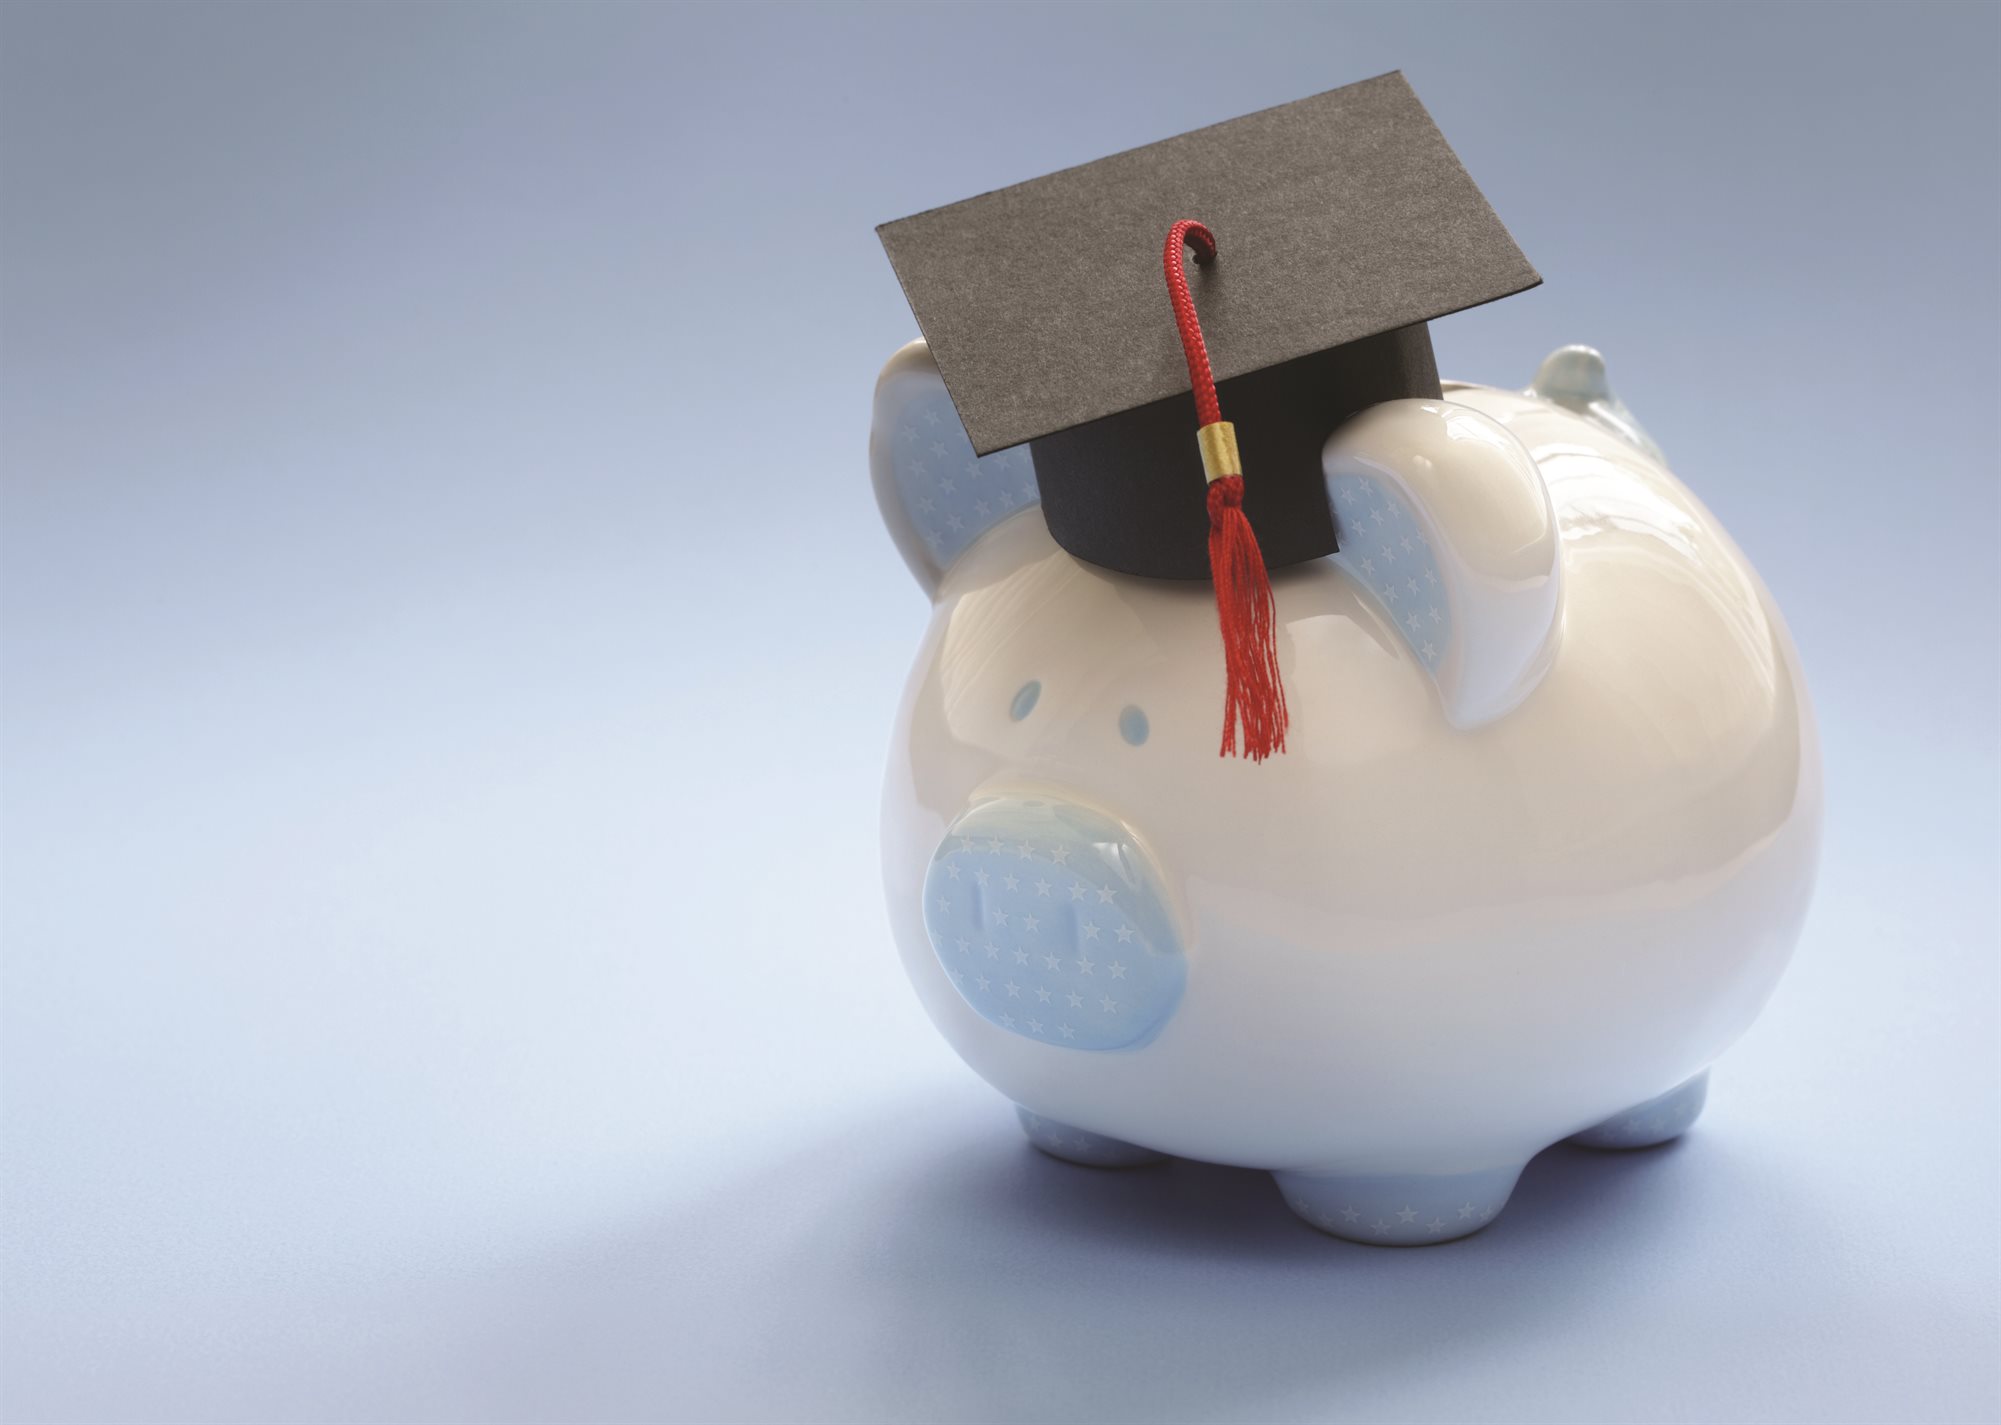 Piggy bank with mortar board hat on top